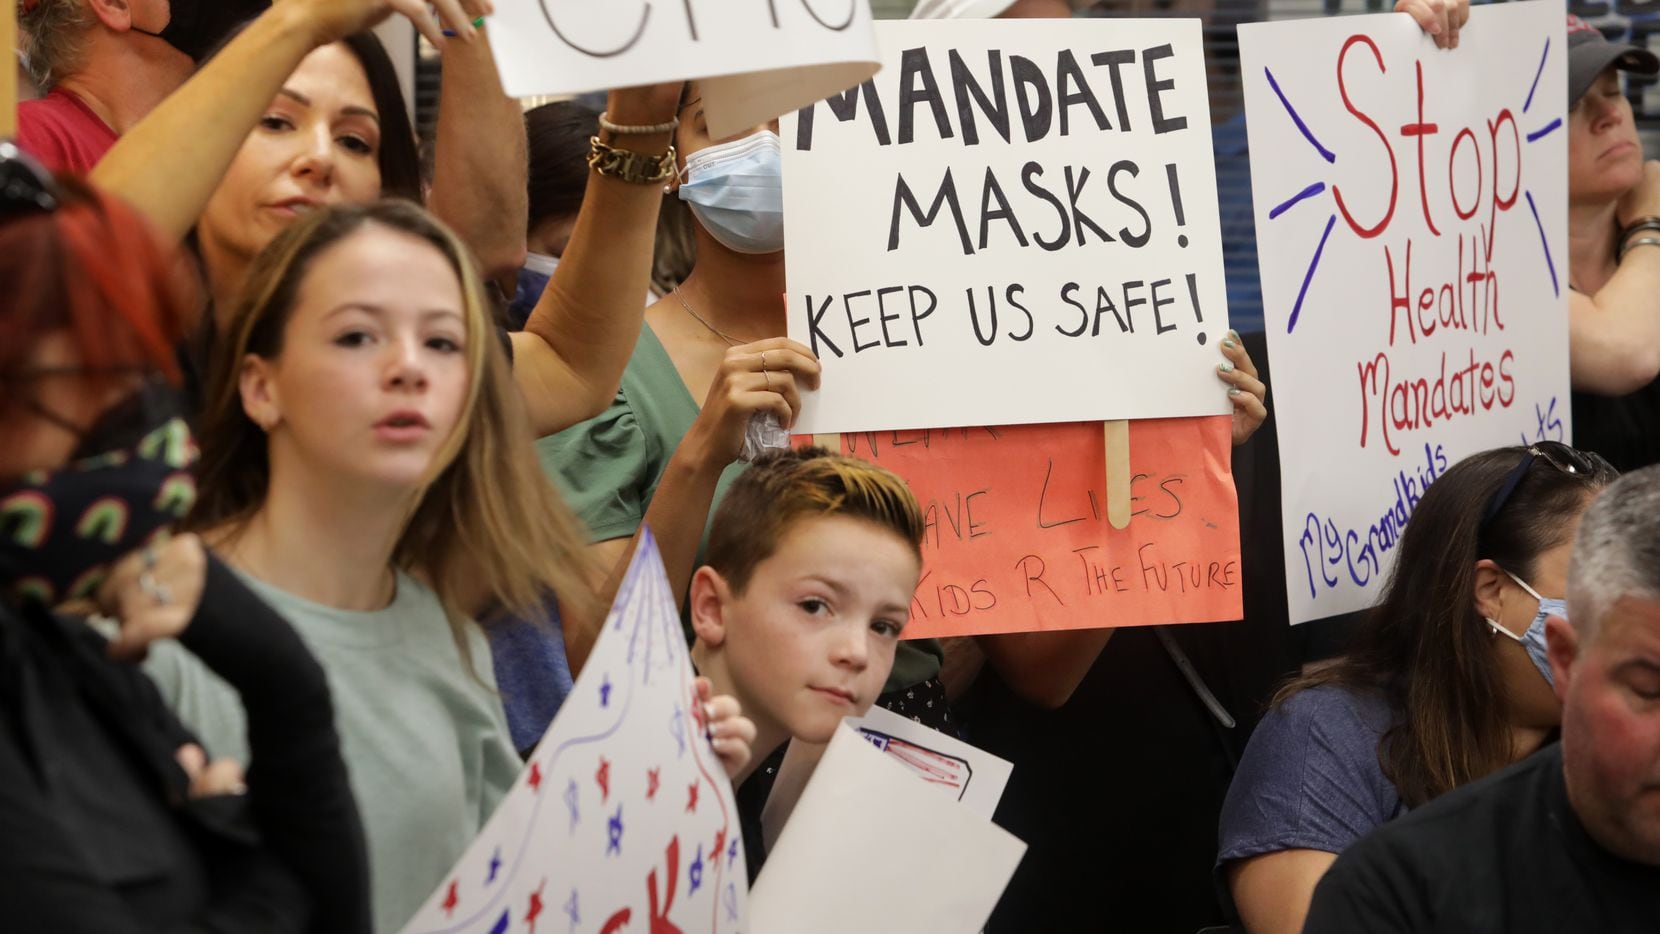 Community members on both sides of the masking debate gathered Monday during an emergency...